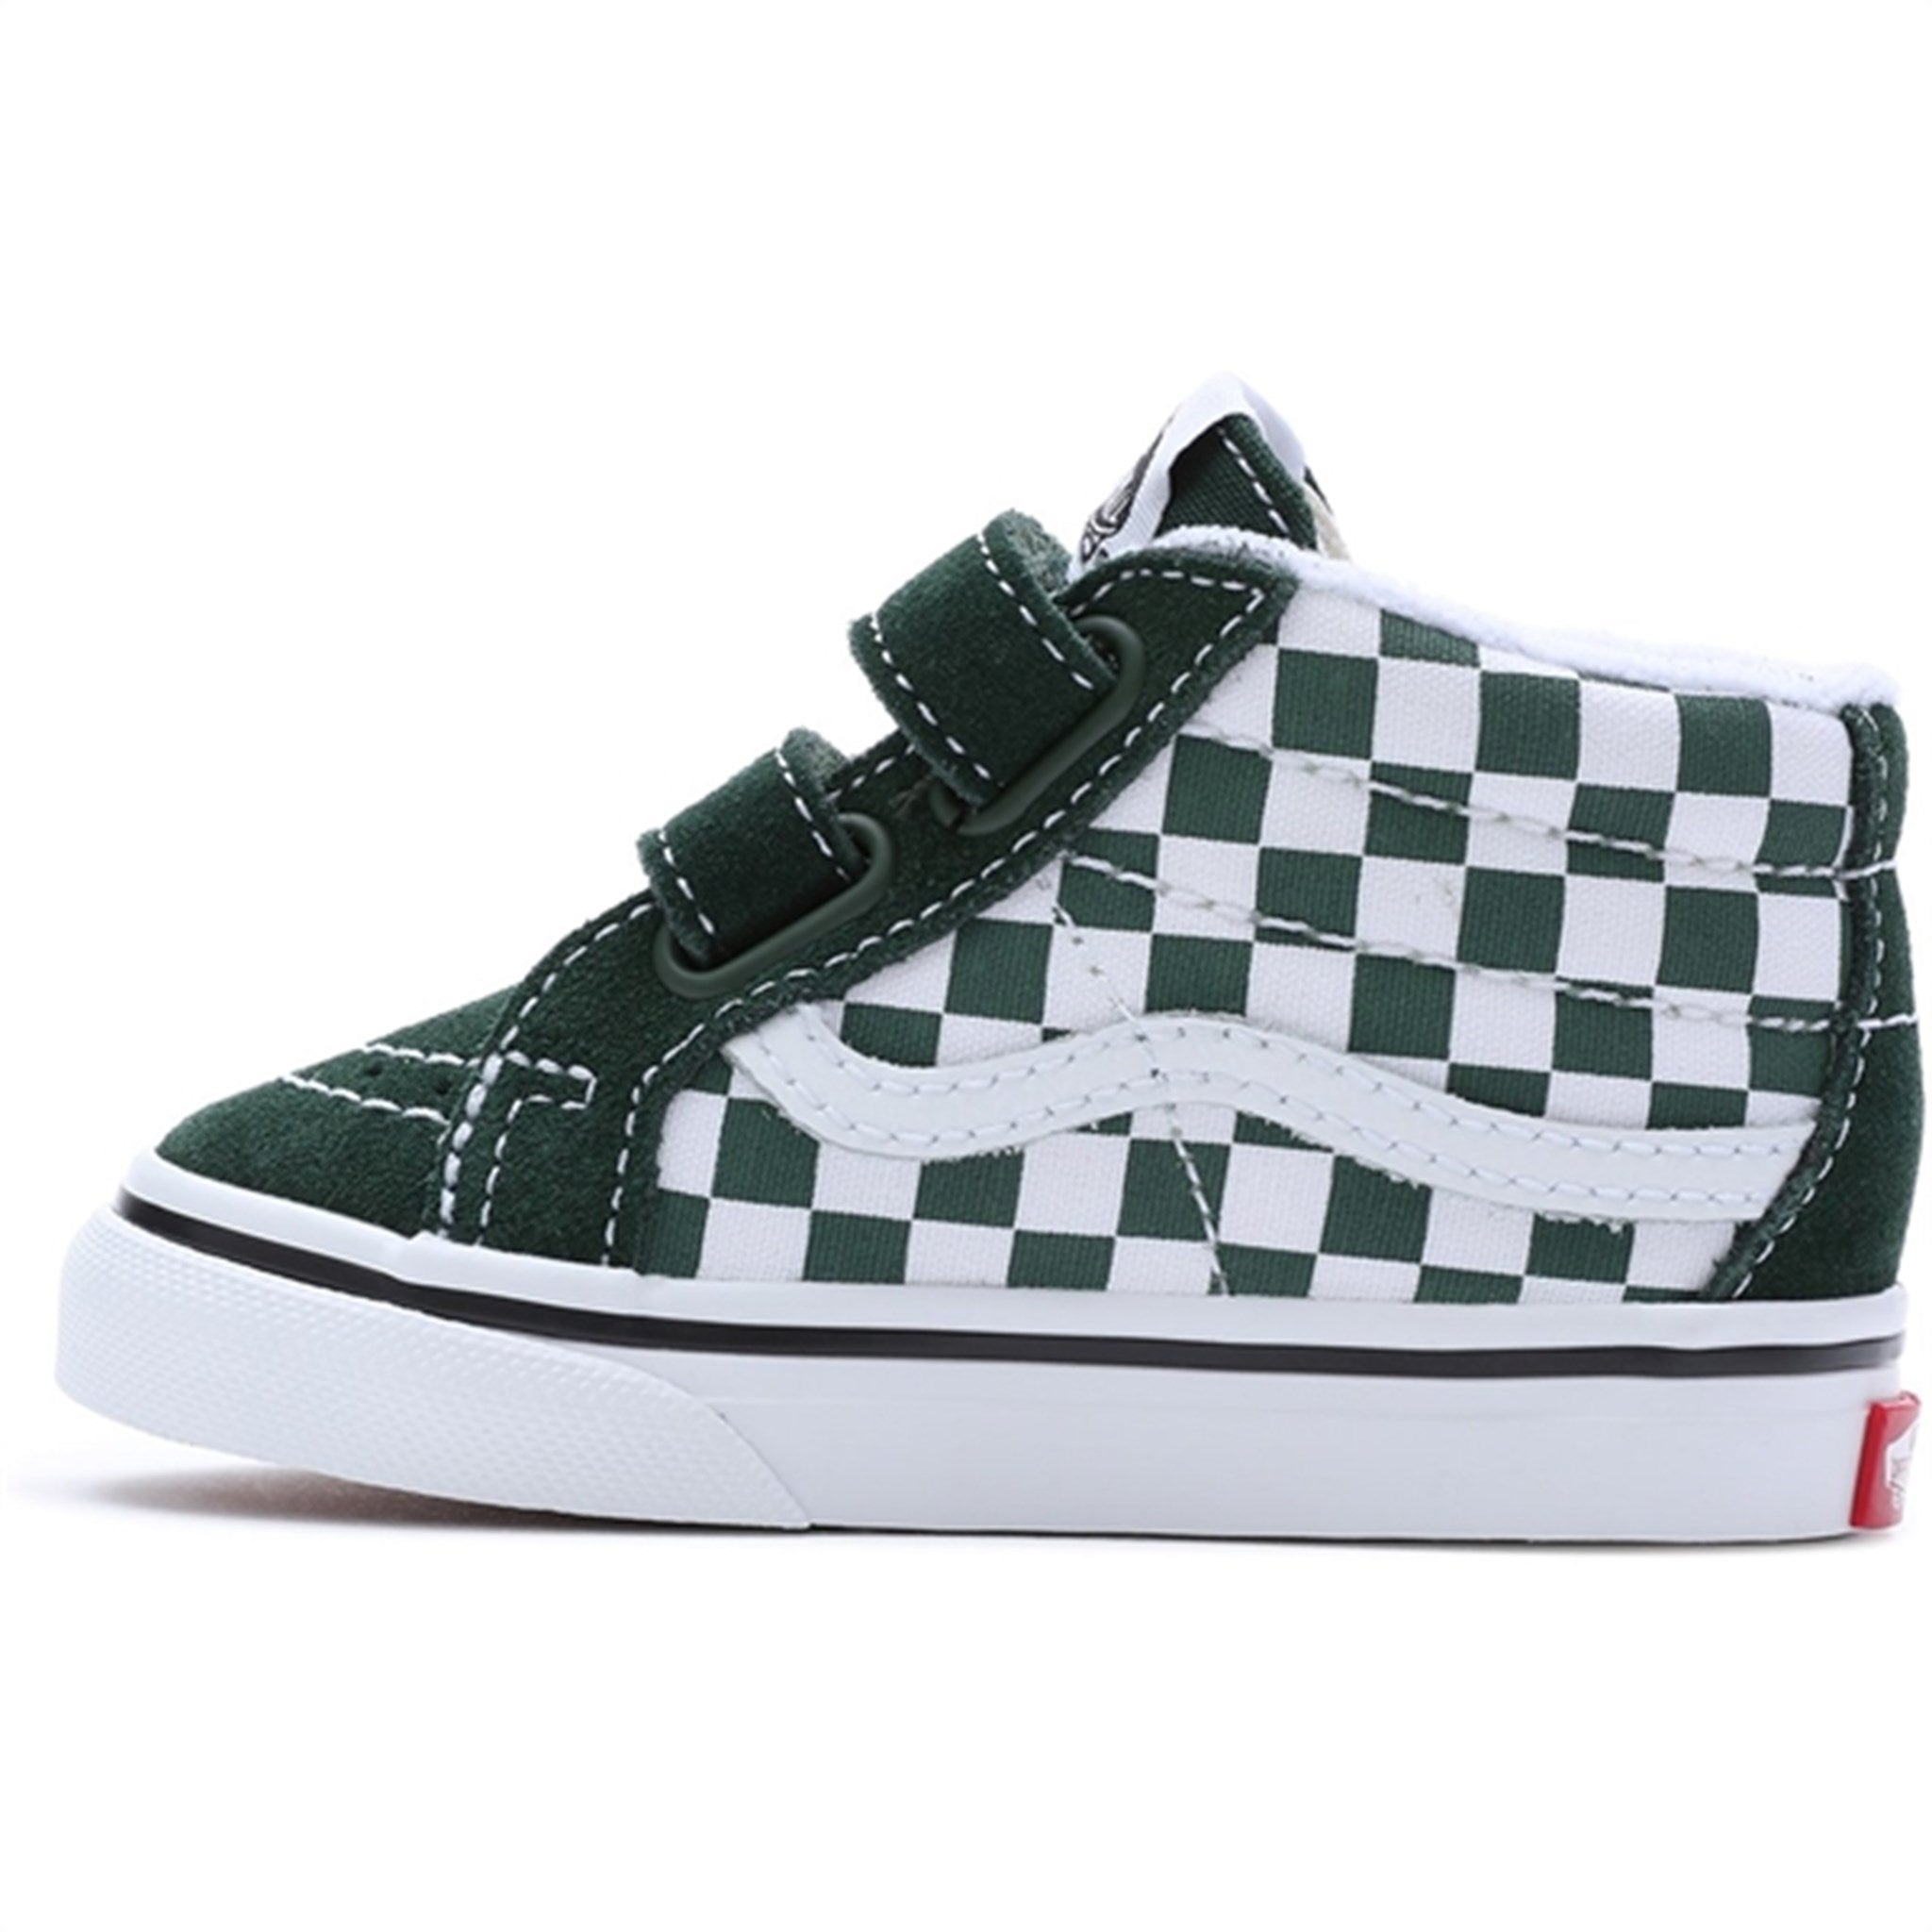 VANS Td Sk8-Mid Reissue V Color Theory Checkerboard Mountain View Skor 2